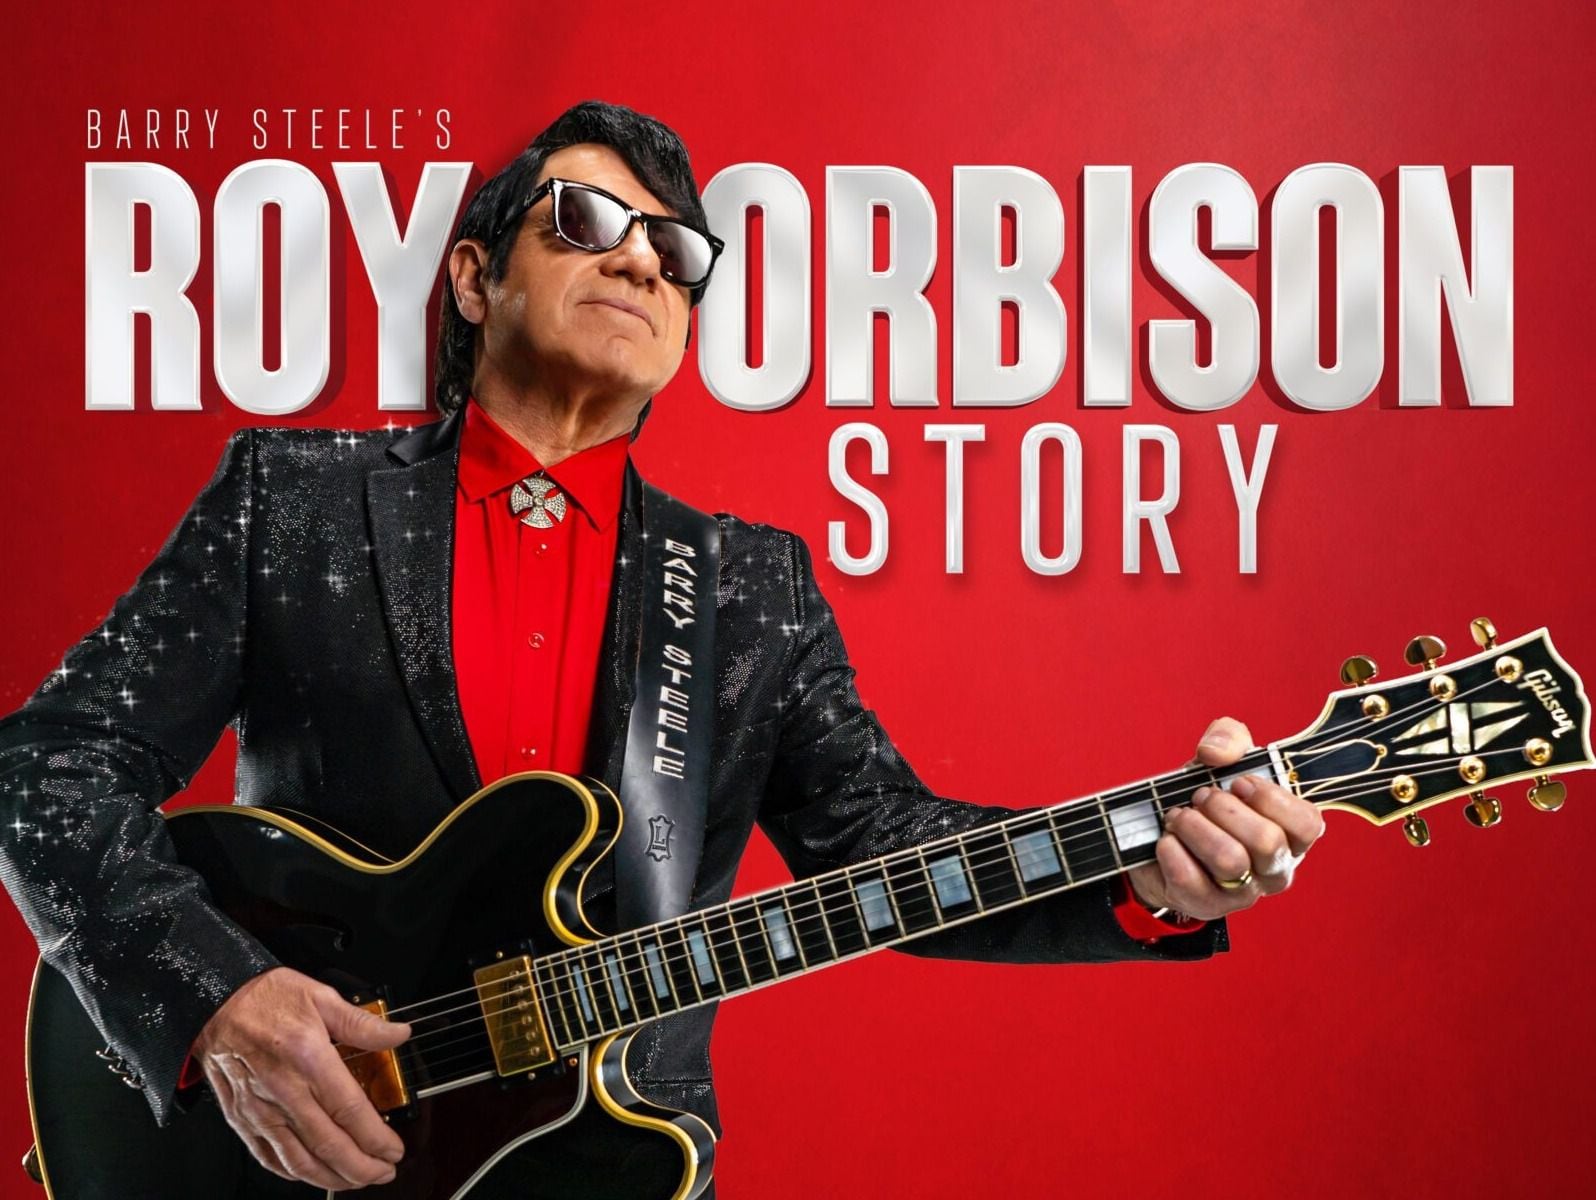 Barry Steele's Roy Orbison Story heading to Sutton Coldfield Town Hall